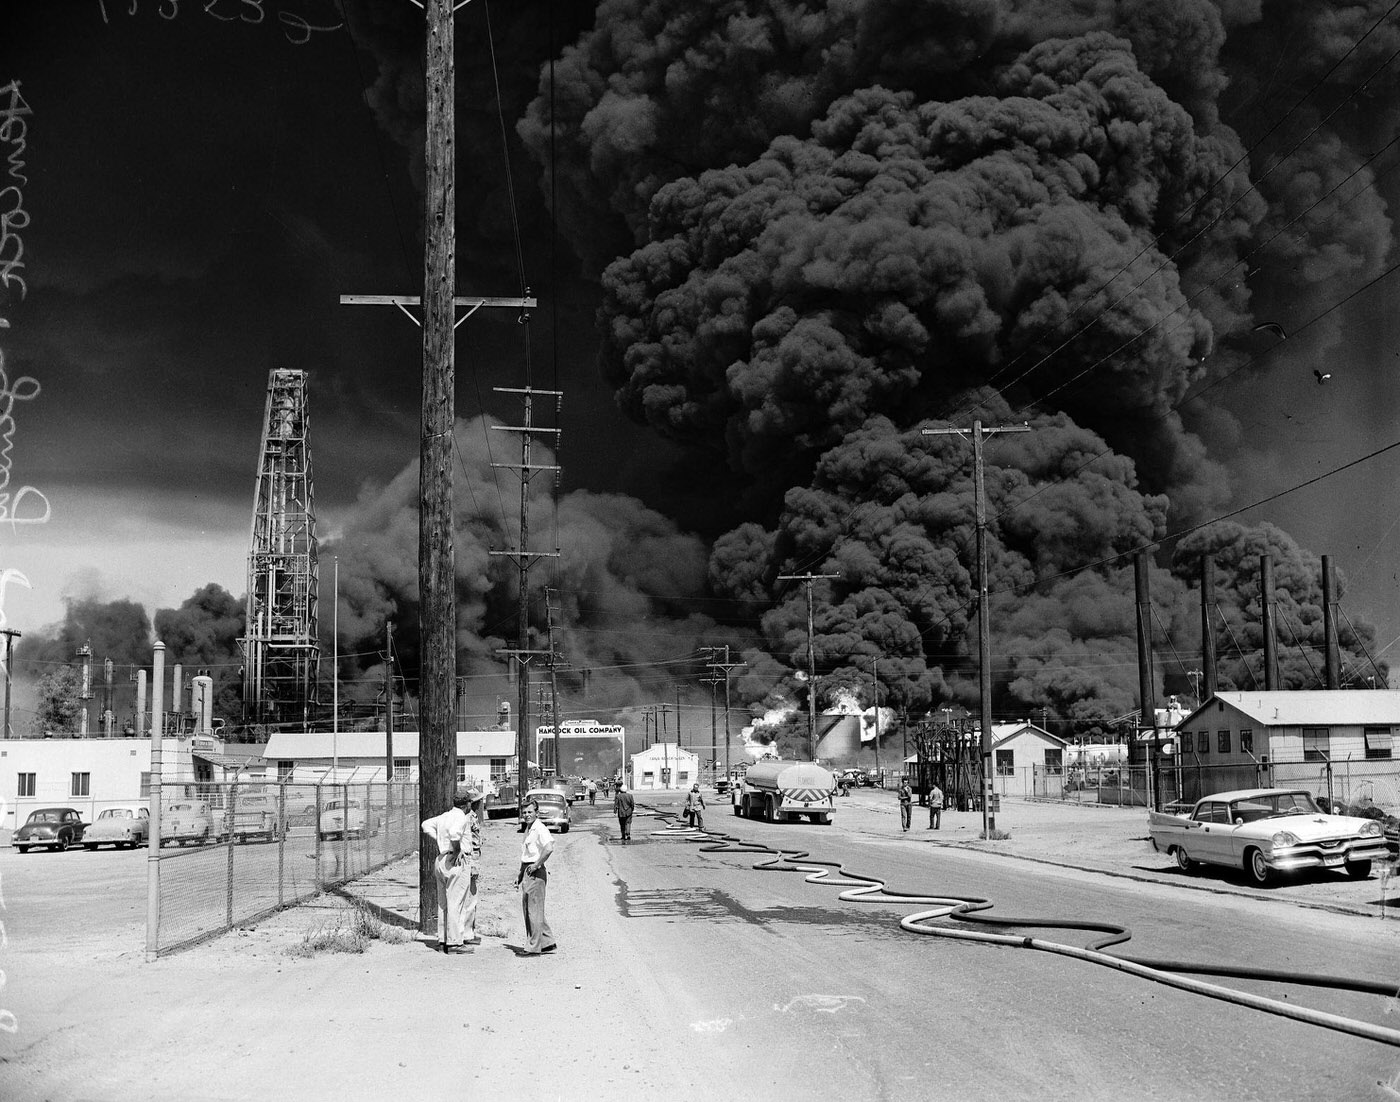 The 1958 Hancock Oil Refinery Fire on Signal Hill: A Catastrophic Day That Changed Safety Regulations